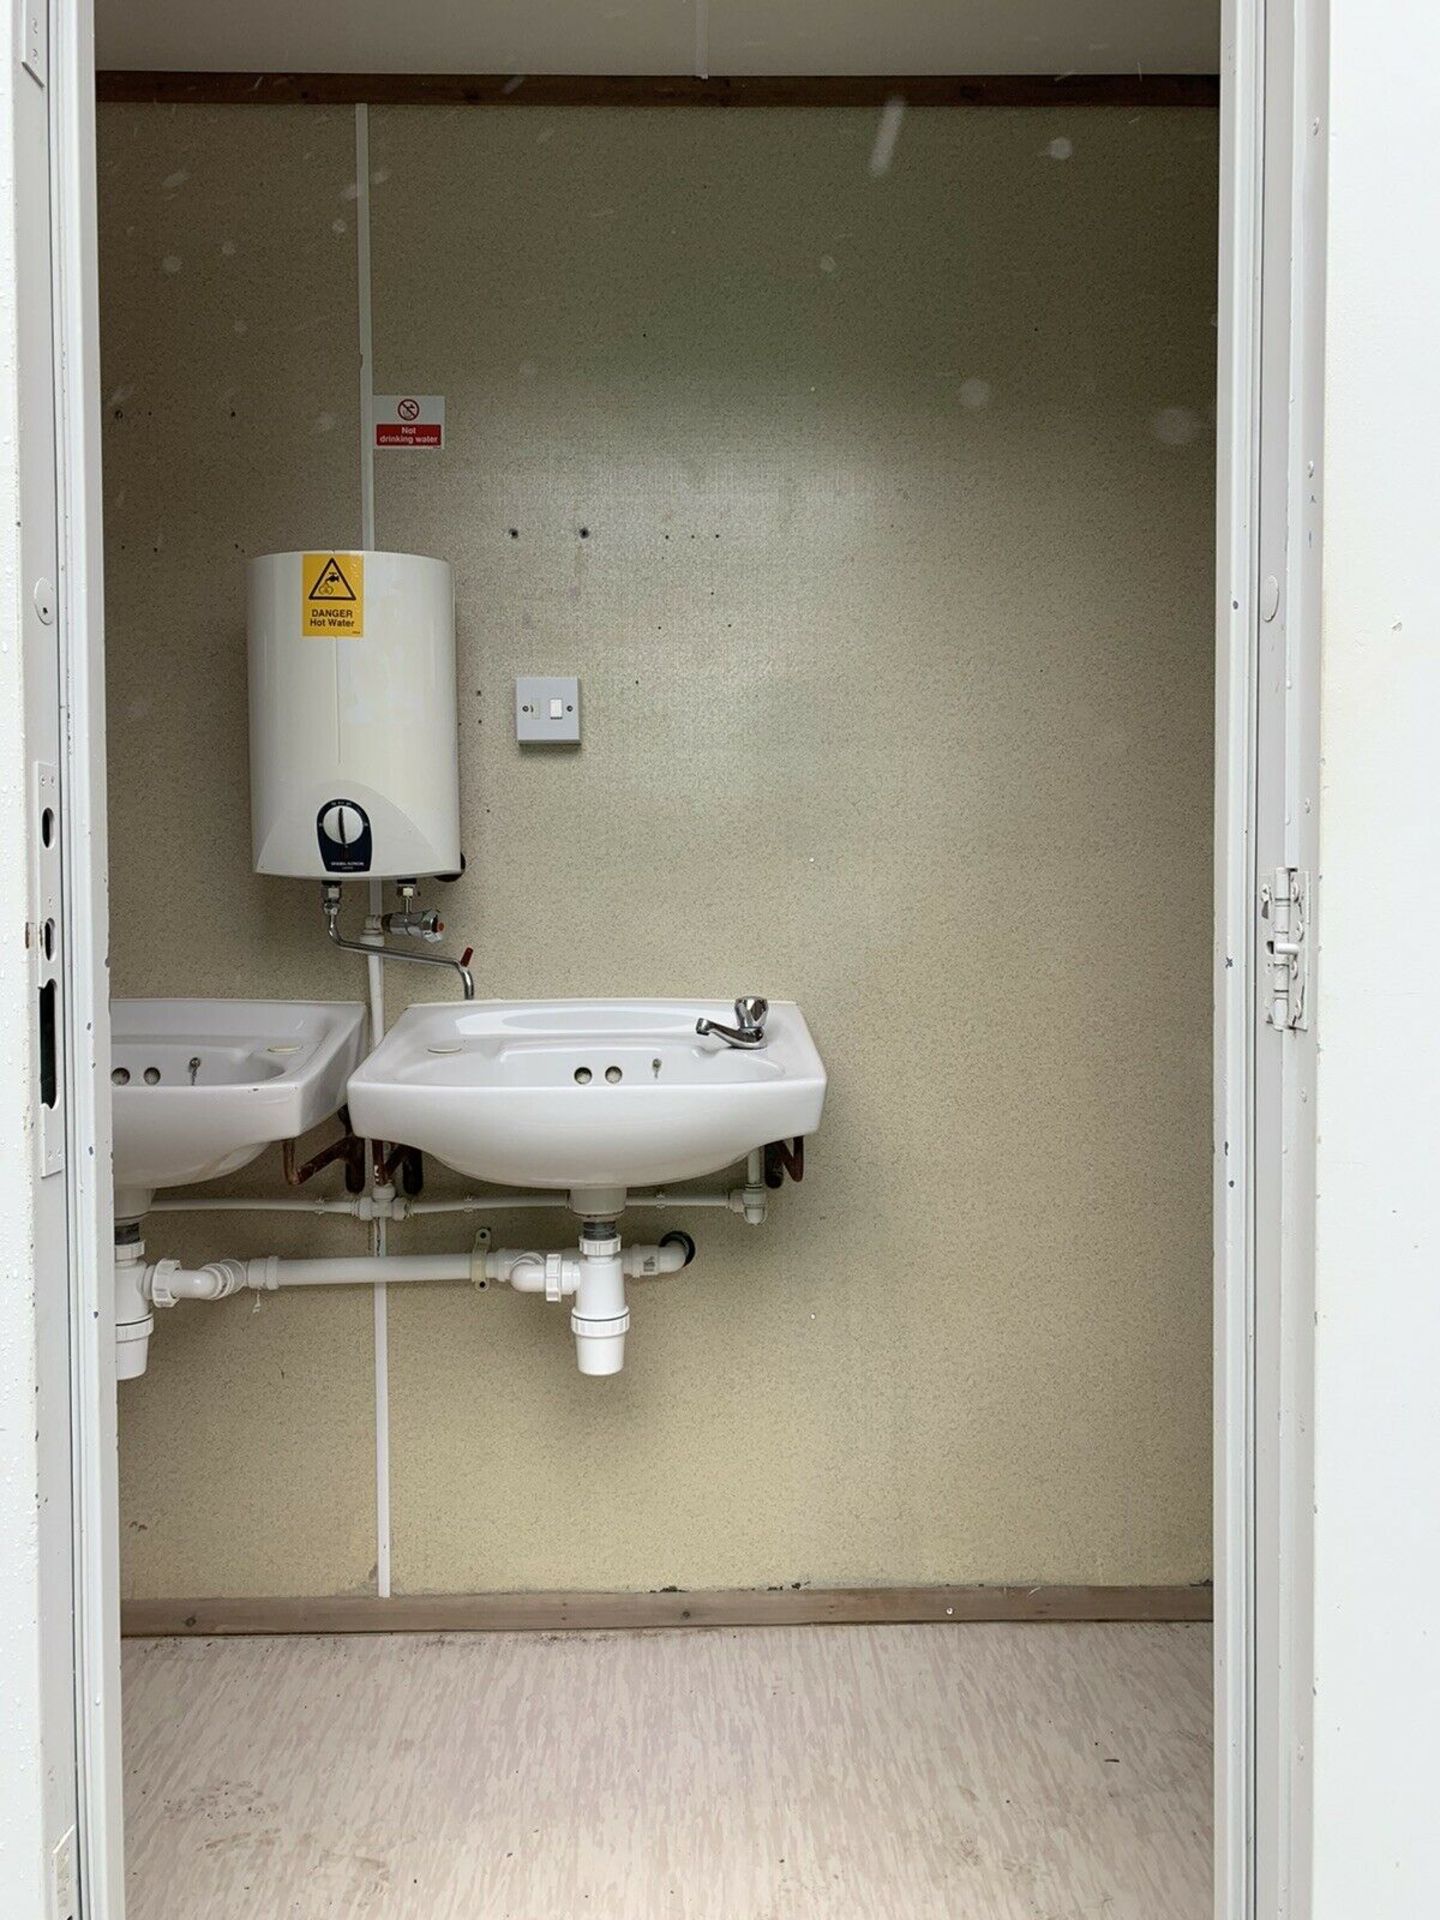 Portable Shower / Drying Room With Toilets - Image 9 of 11